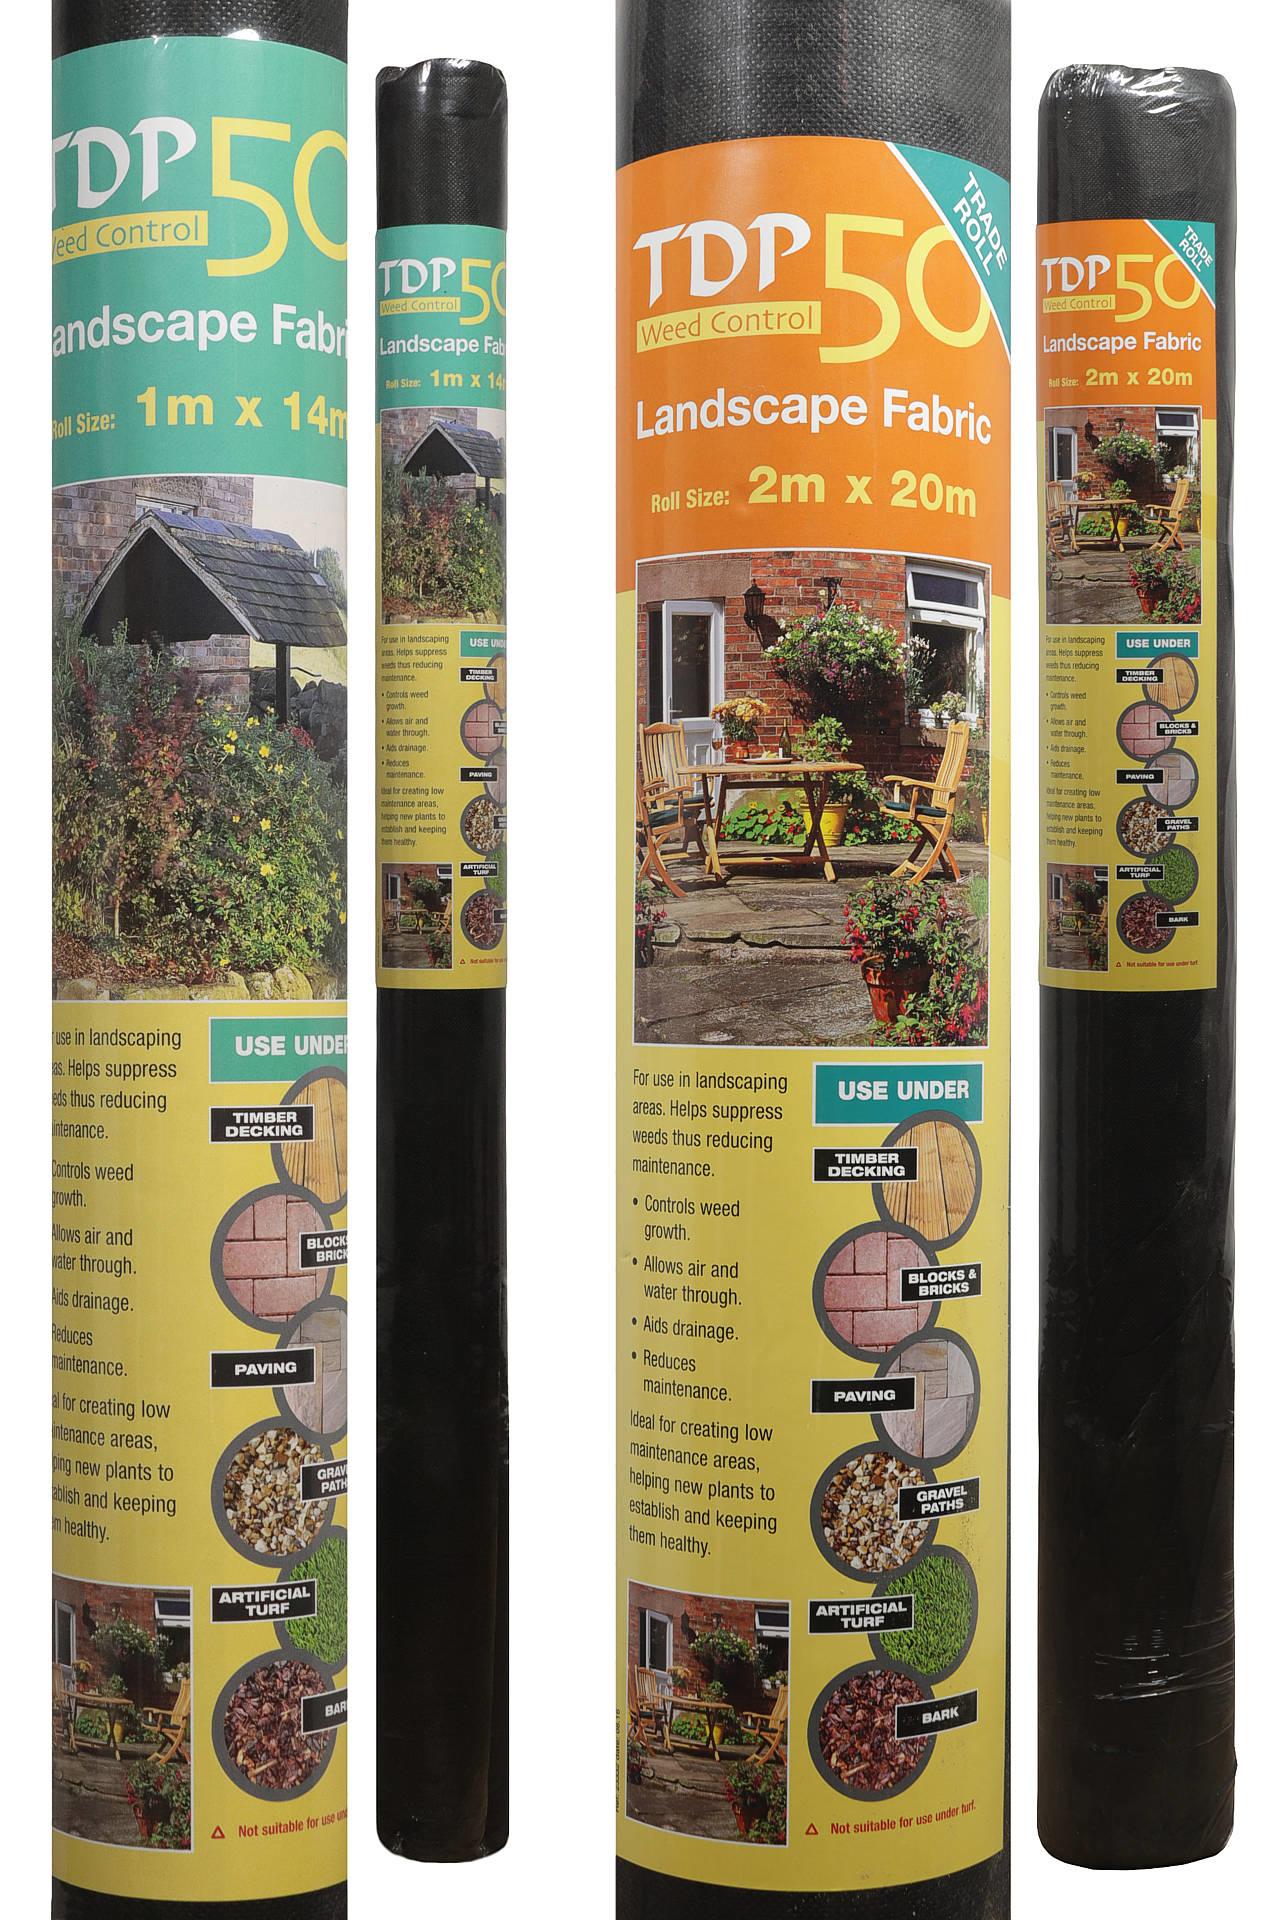 TDP50 Weed Control Landscaping Fabric